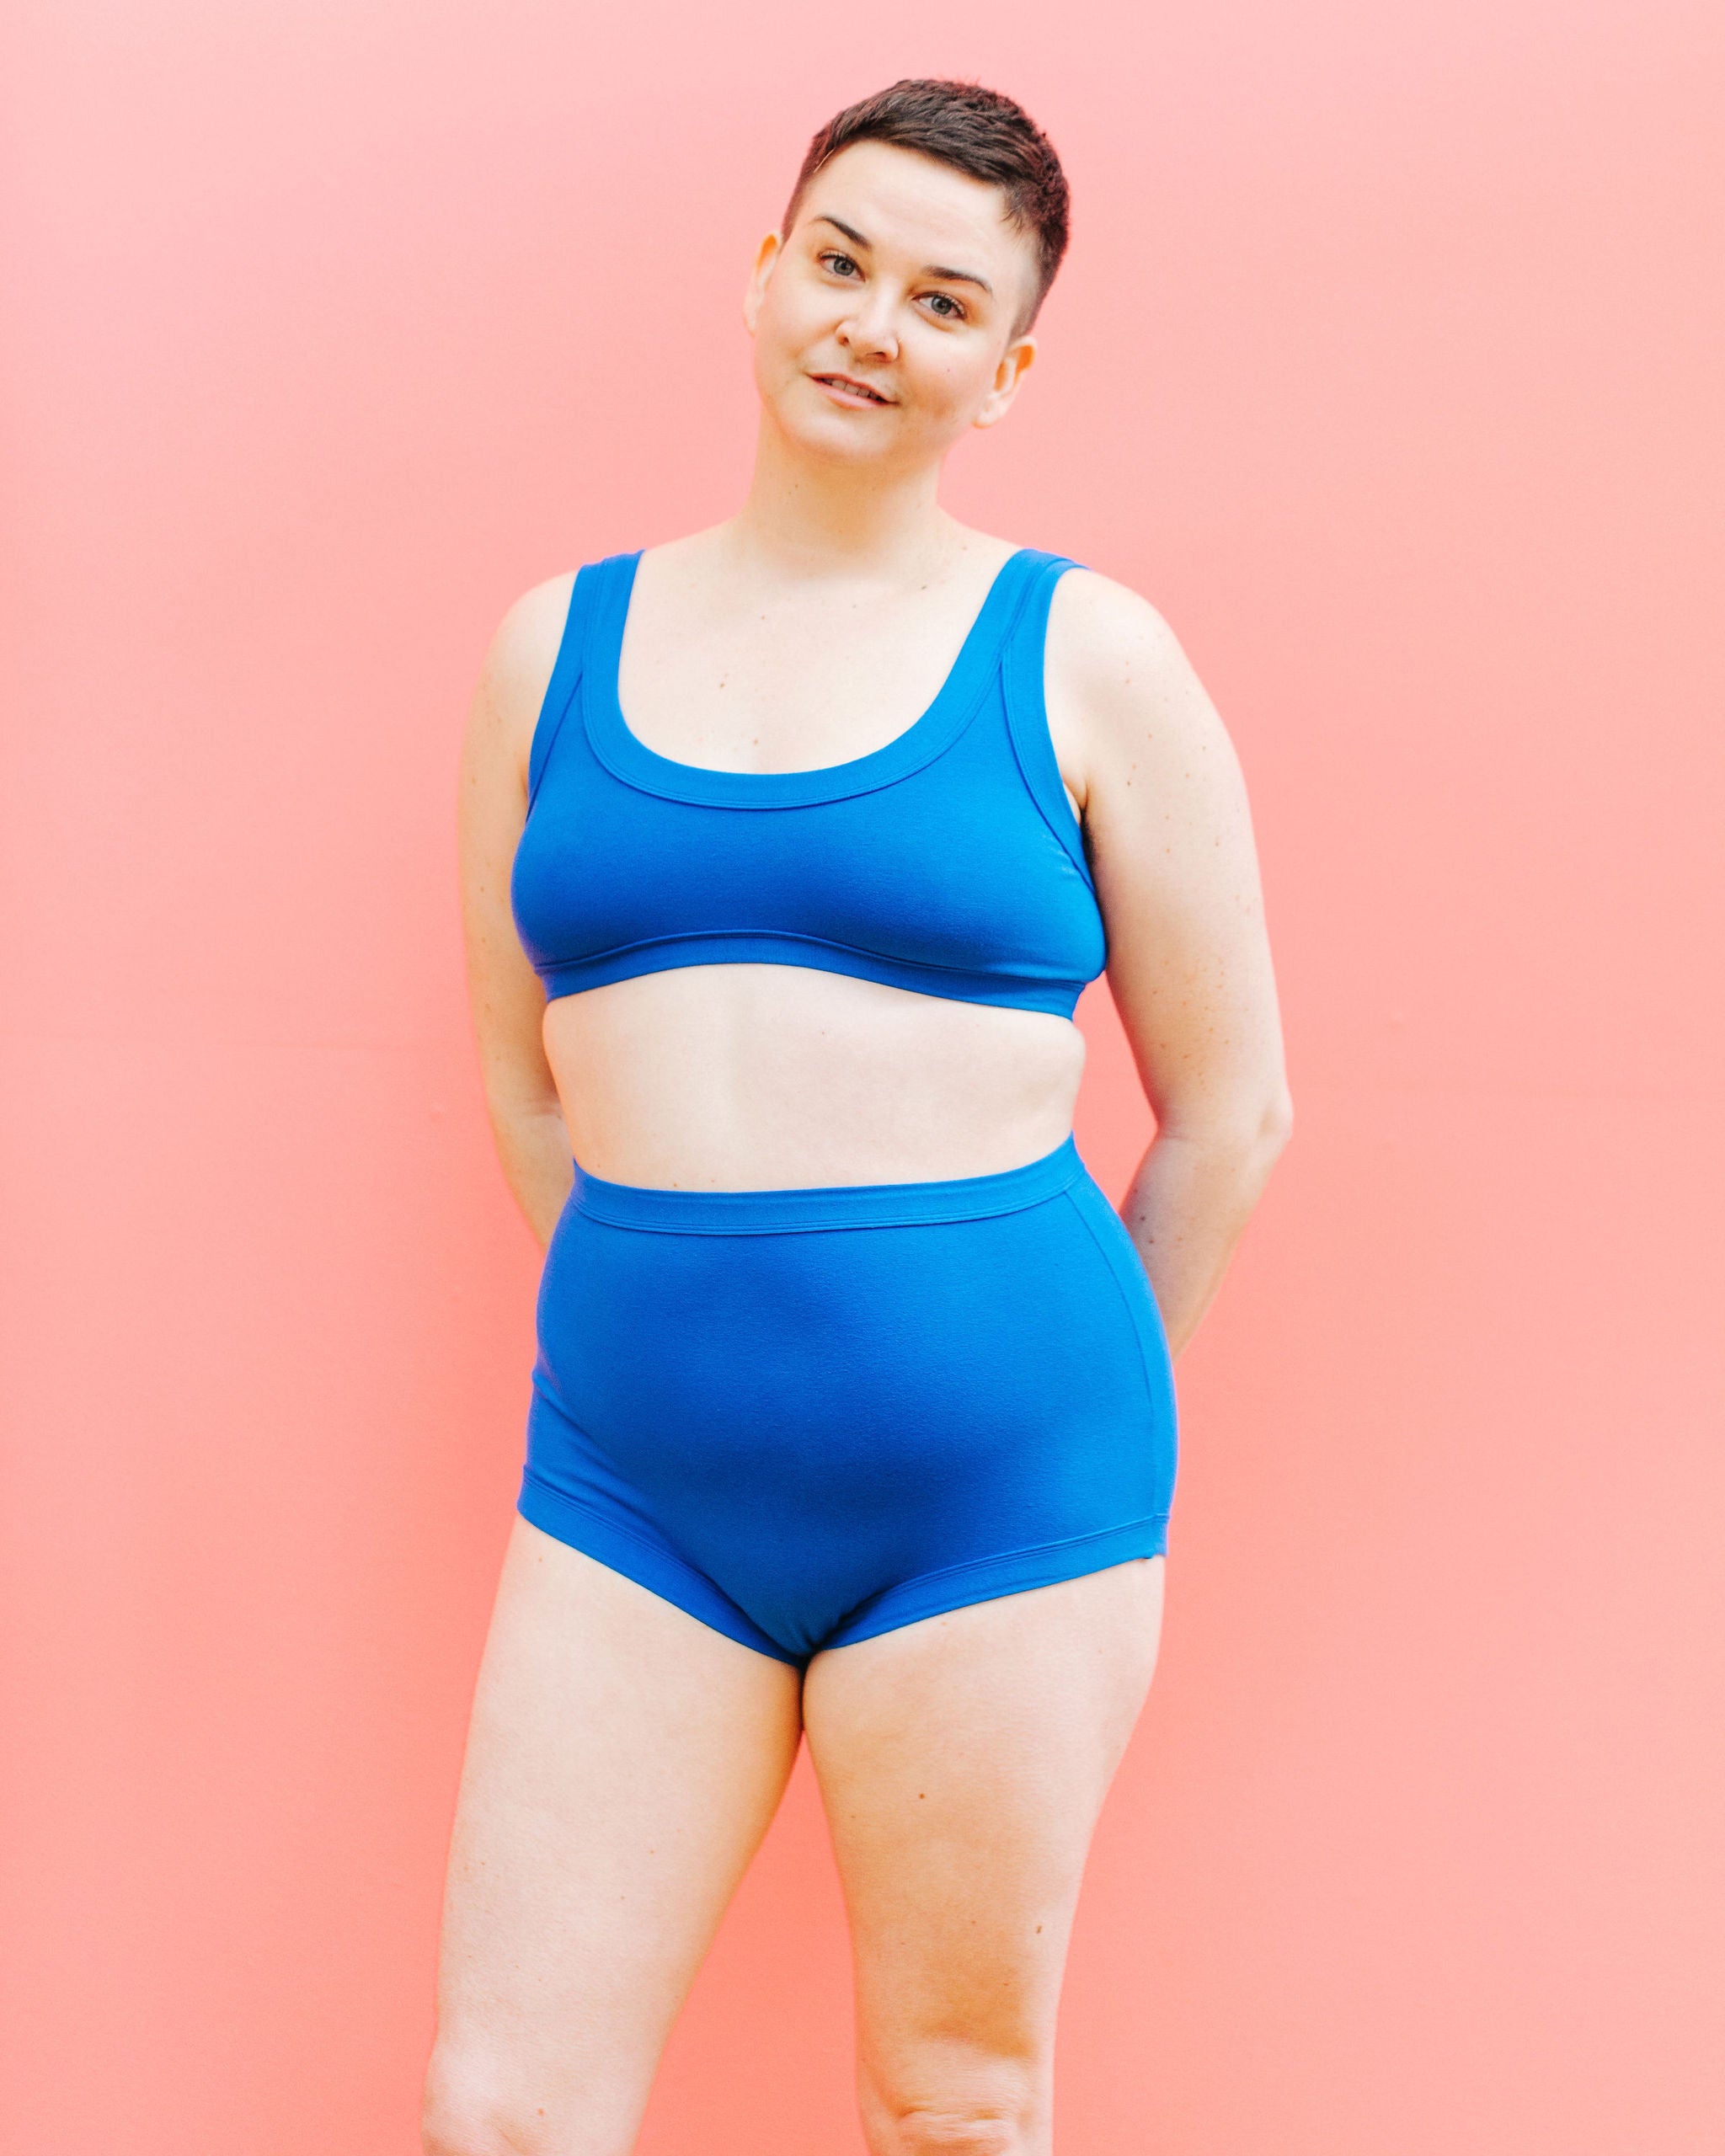 Model wearing Thunderpants Sky Rise style underwear and Bralette in Blueberry Blue.